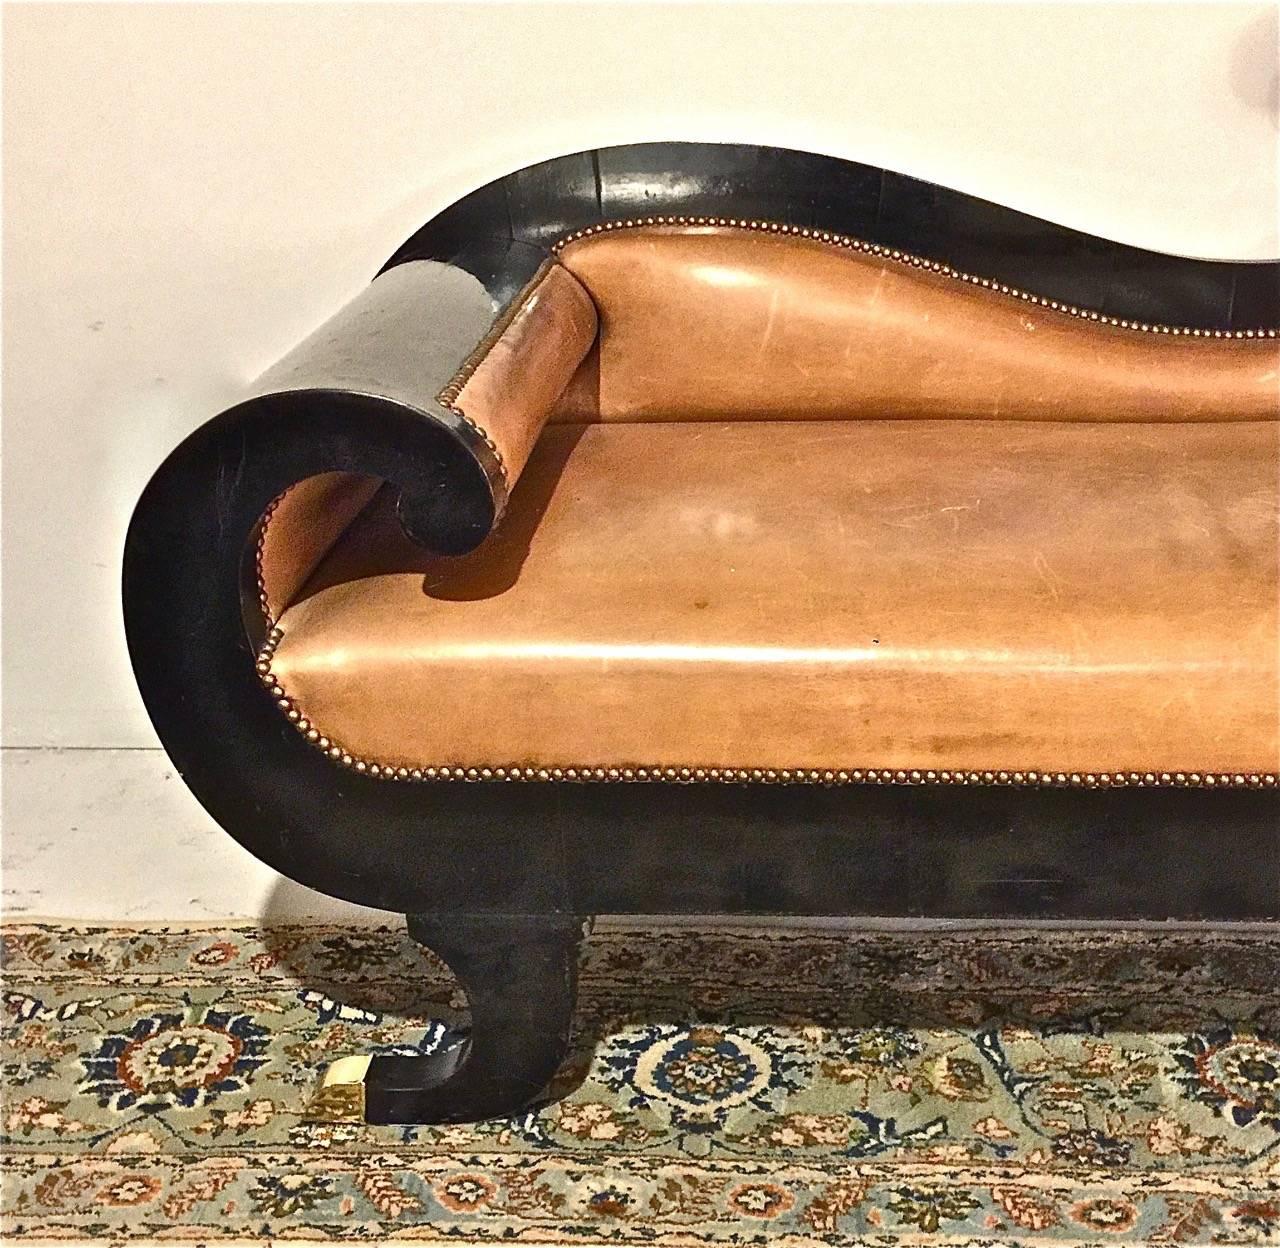 Stunning period English late Regency, circa1830-1840 recamier or sofa. I believe that the recamier retains its original black lacquer finish which has been recently polished; it is upholstered in a light caramel-toned leather which has acquired just